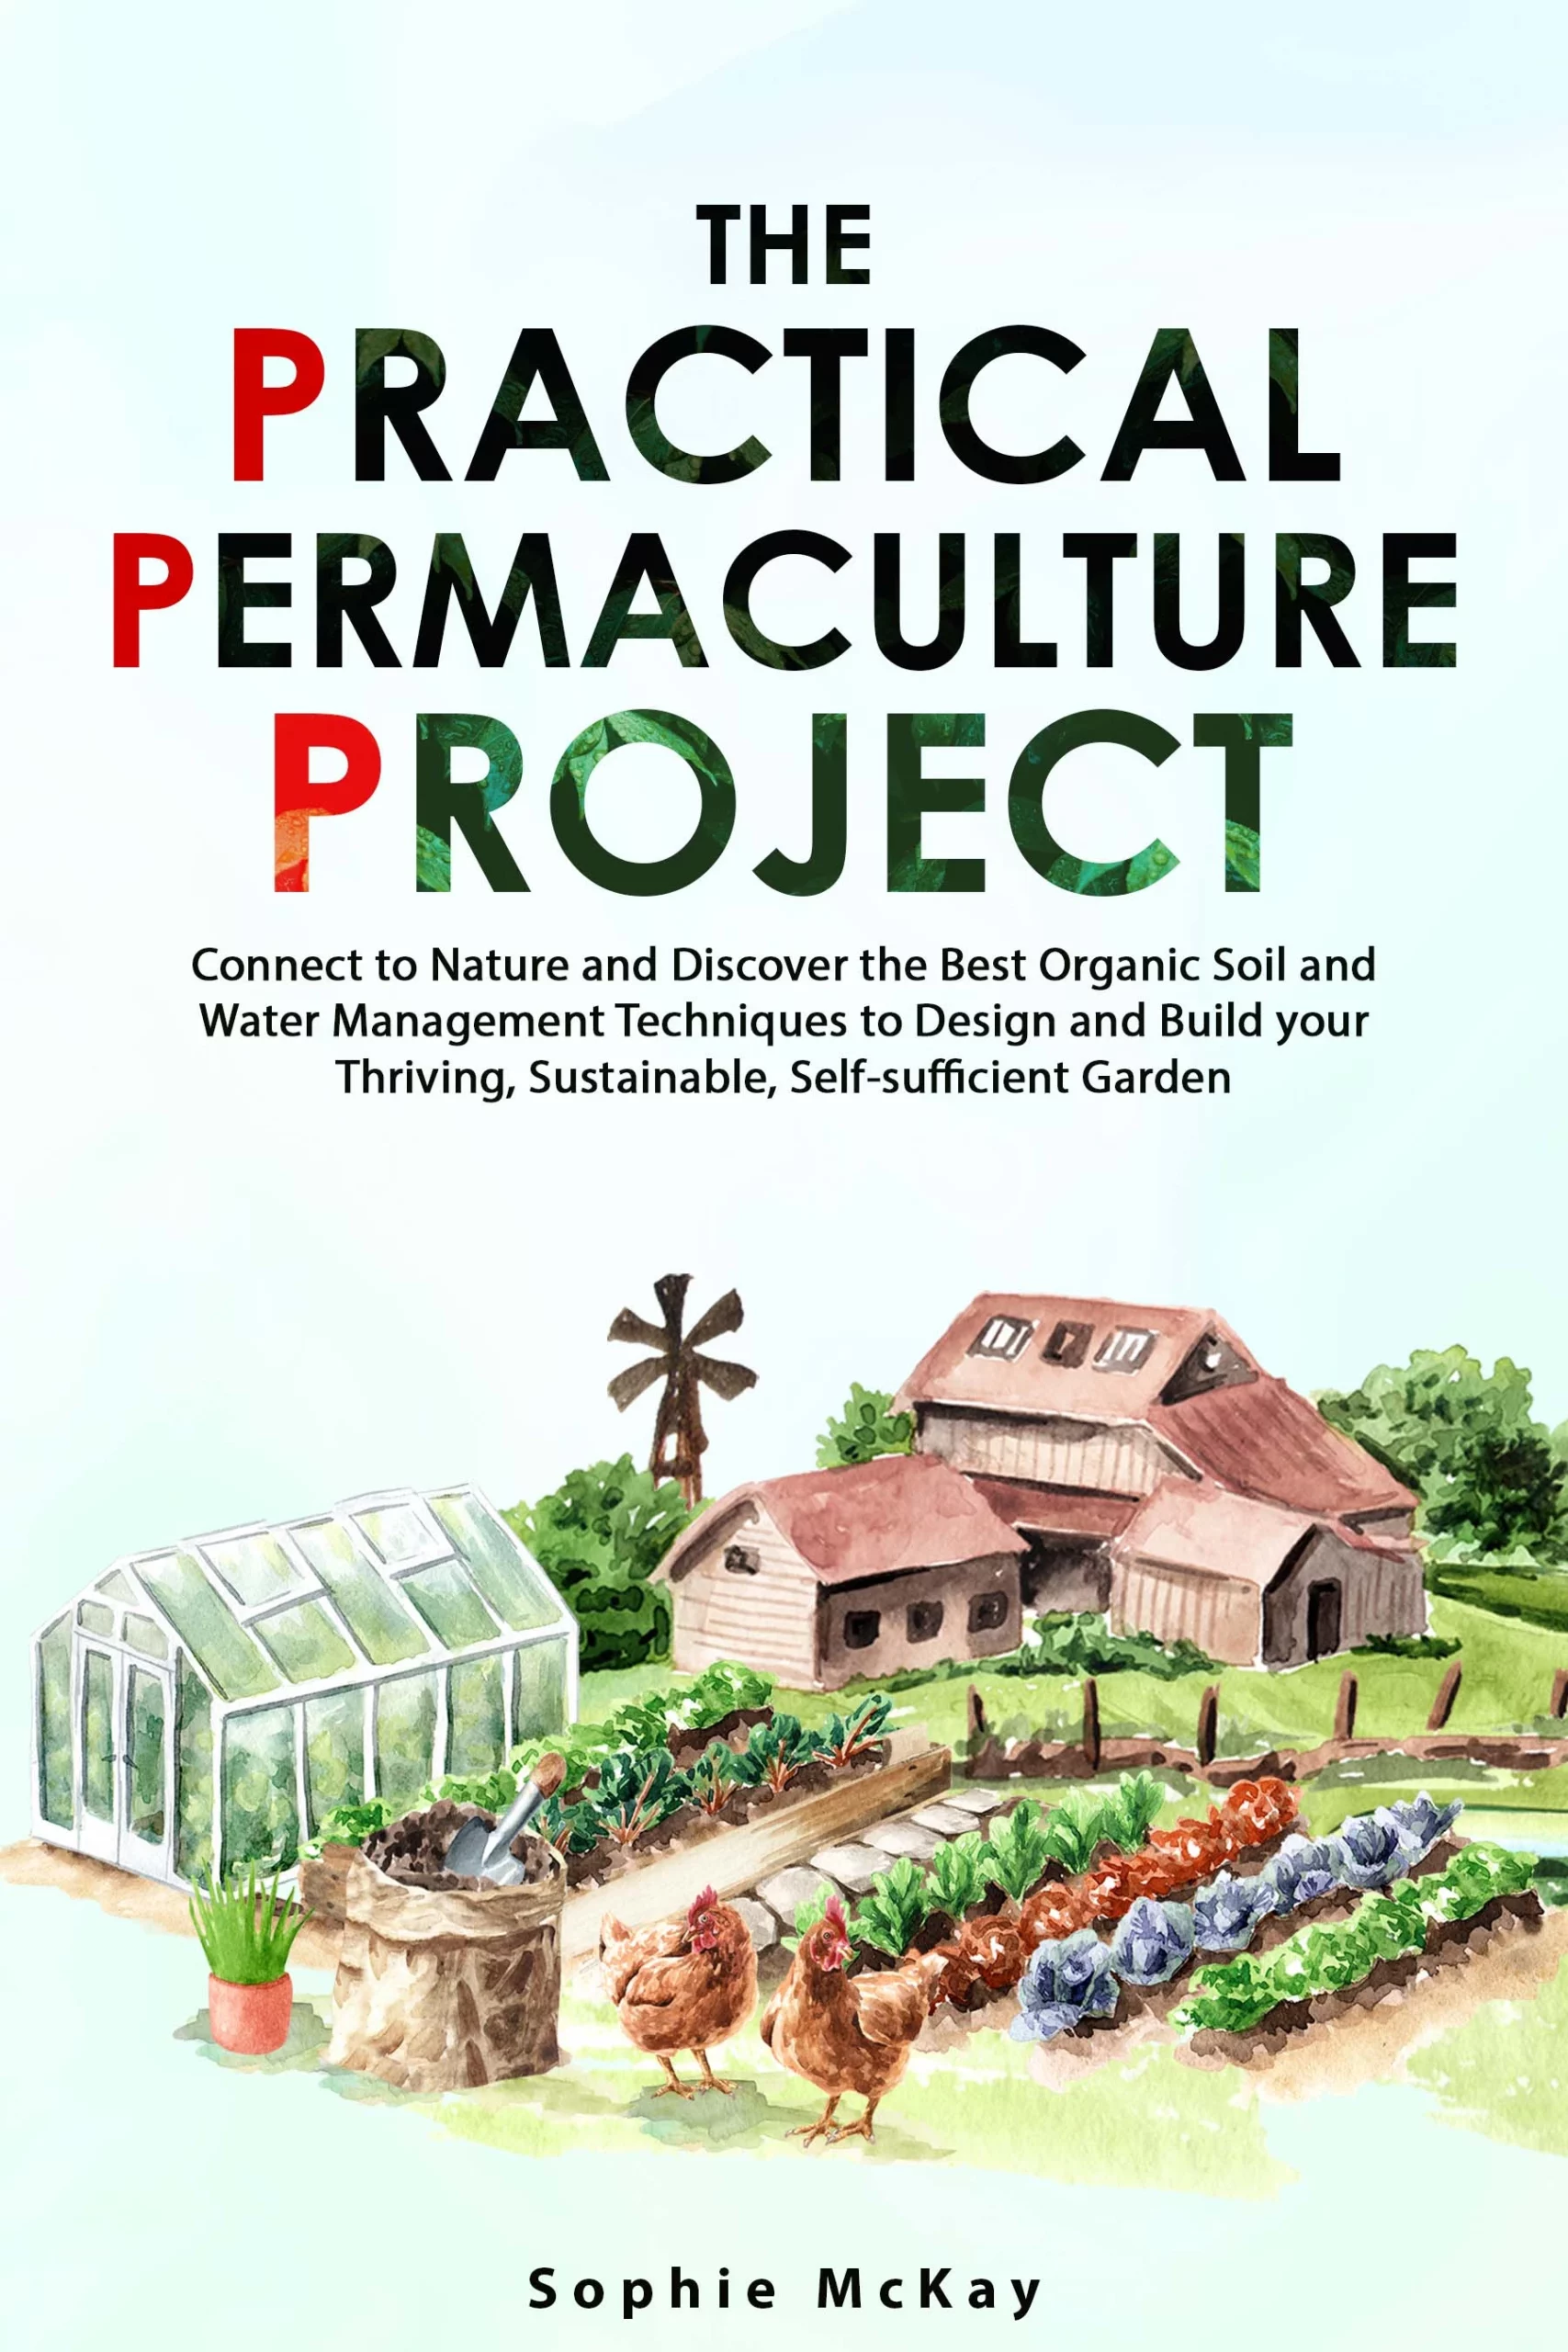 The Practical Permaculture Project  – Connect to Nature and Discover the Best Organic Soil and Water Management Techniques to Design and Build your Thriving, Sustainable, Self-sufficient Garden